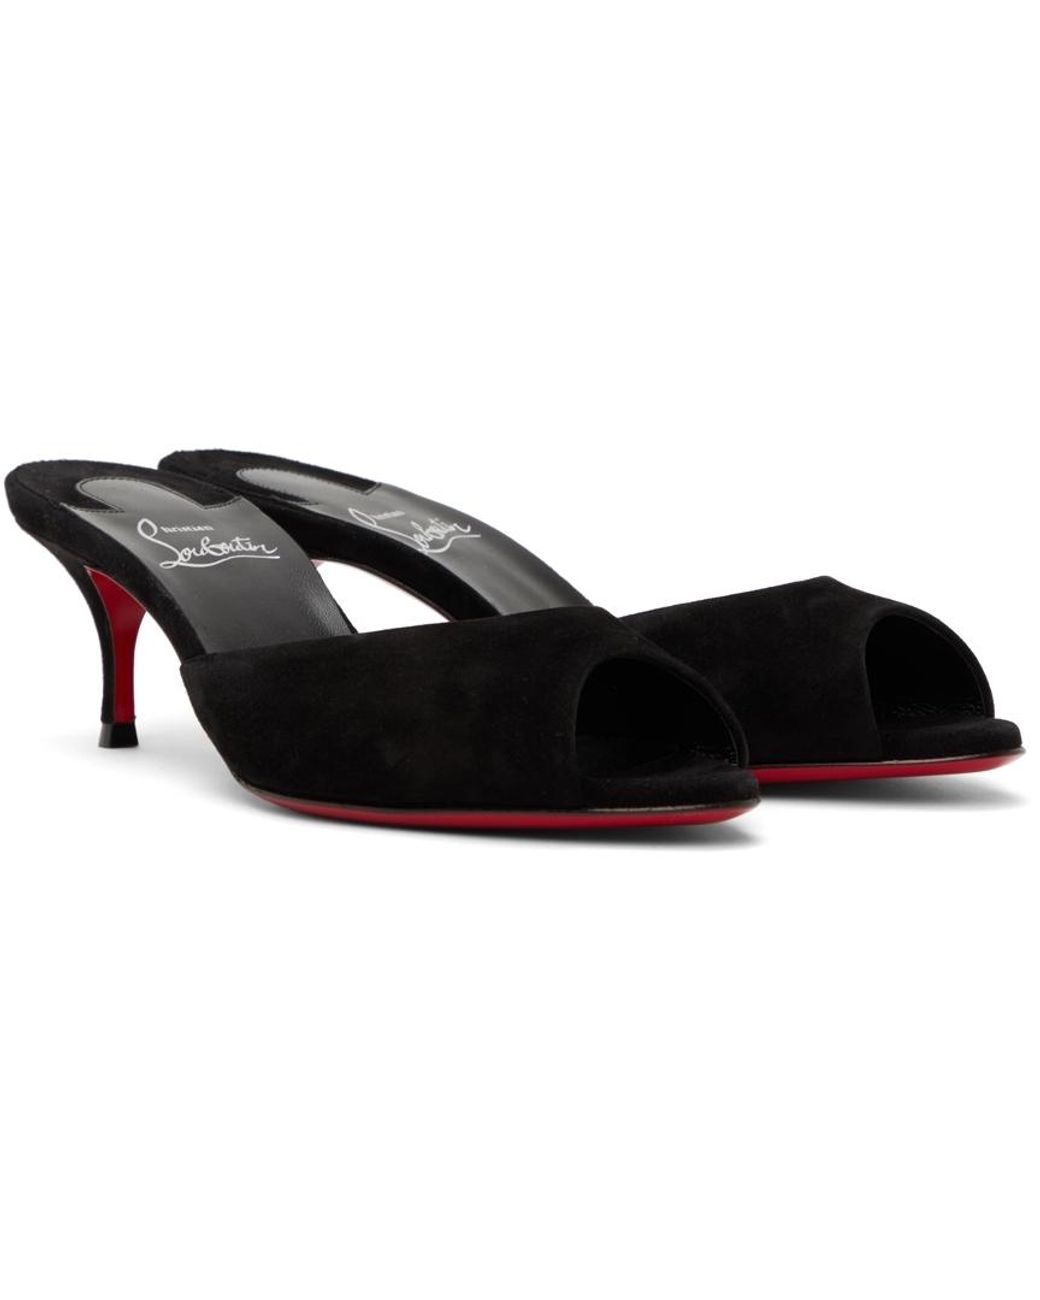 Christian Louboutin Me Dolly 55 Heeled Sandals in Black | Lyst